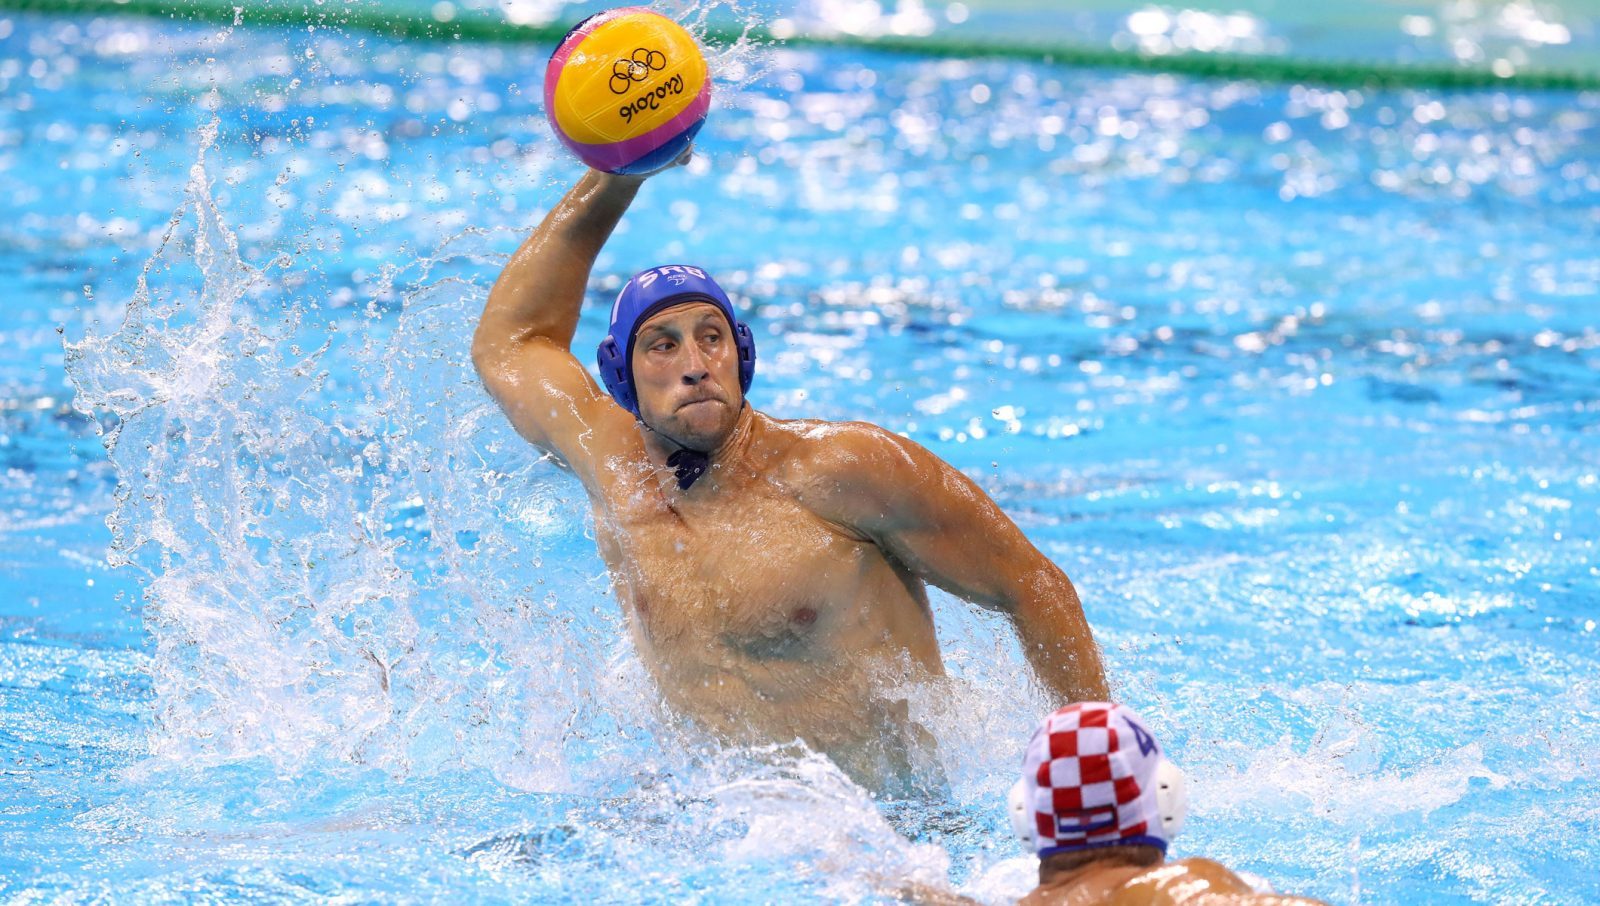 Water Polo 